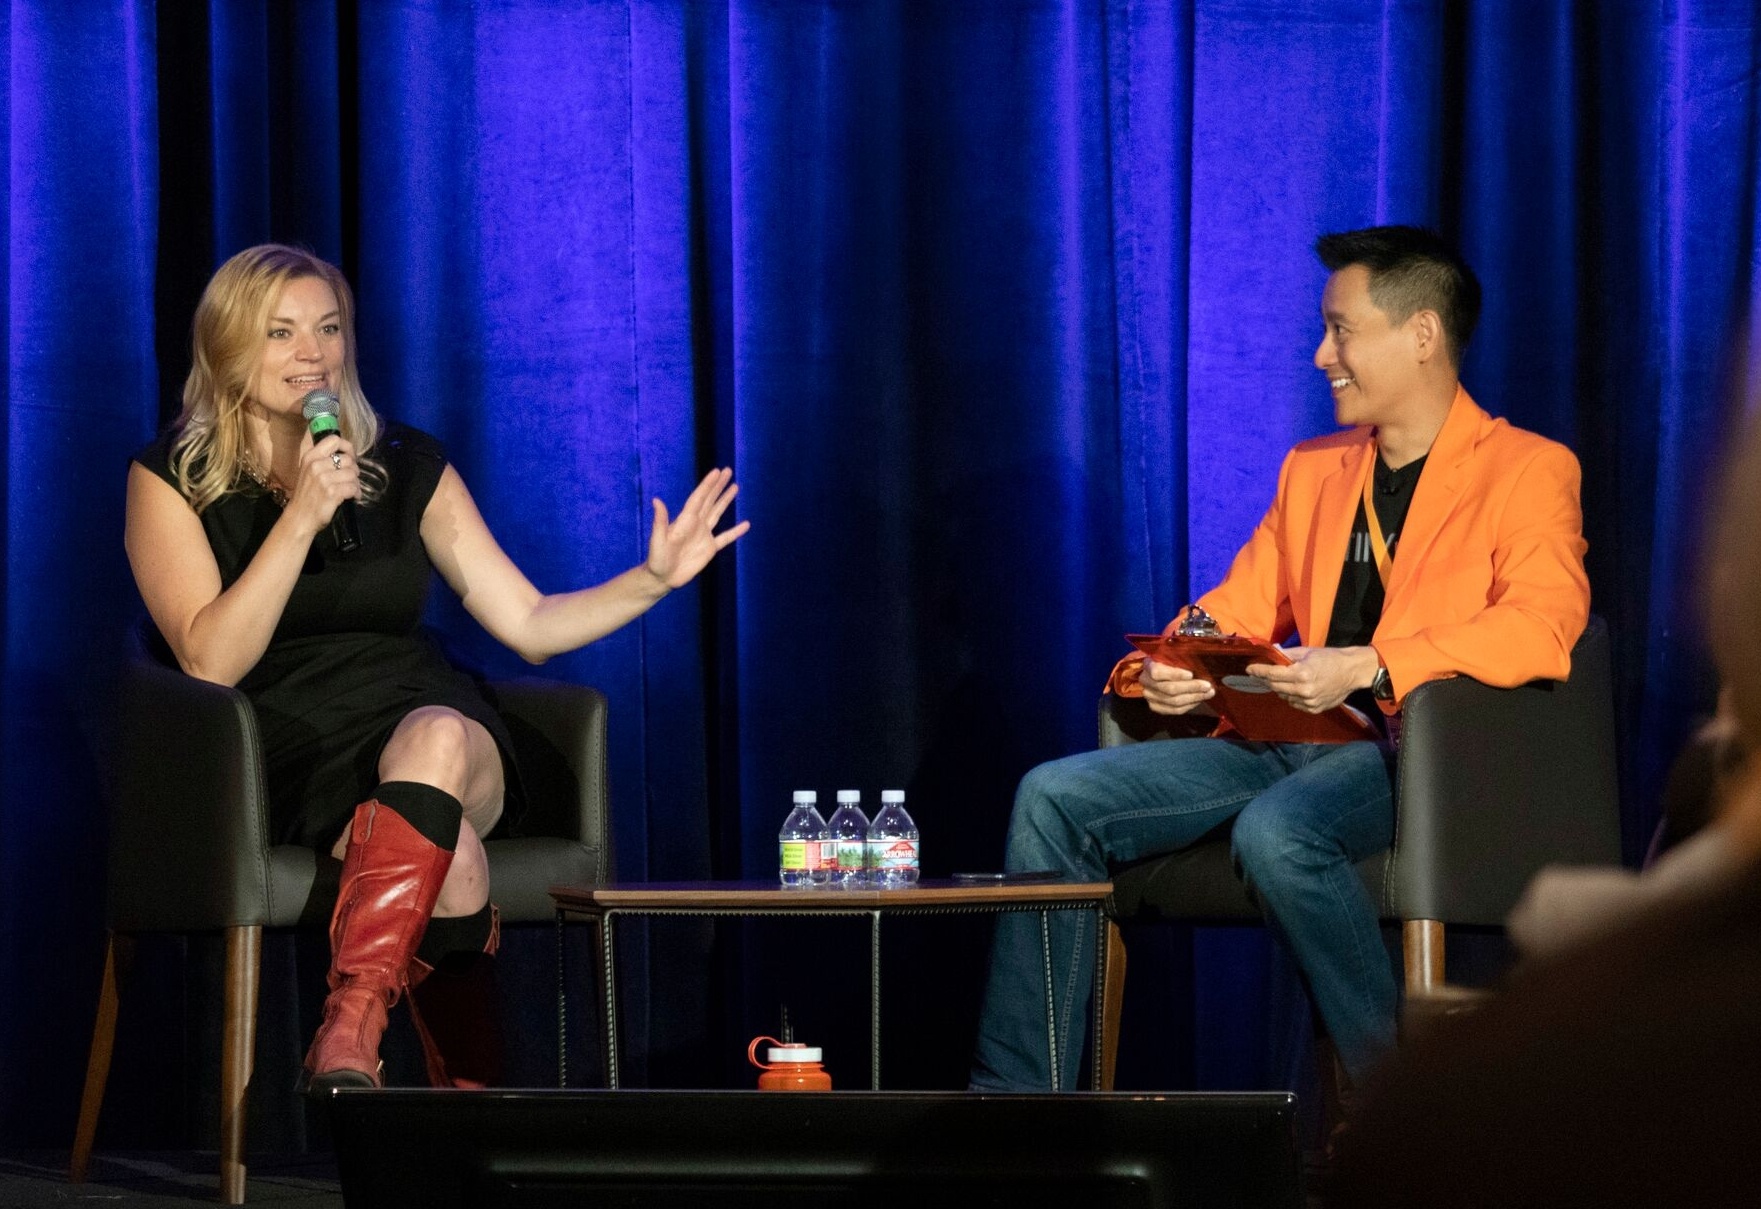 David Niu and Sarah Bird chat on stage for a fireside chat